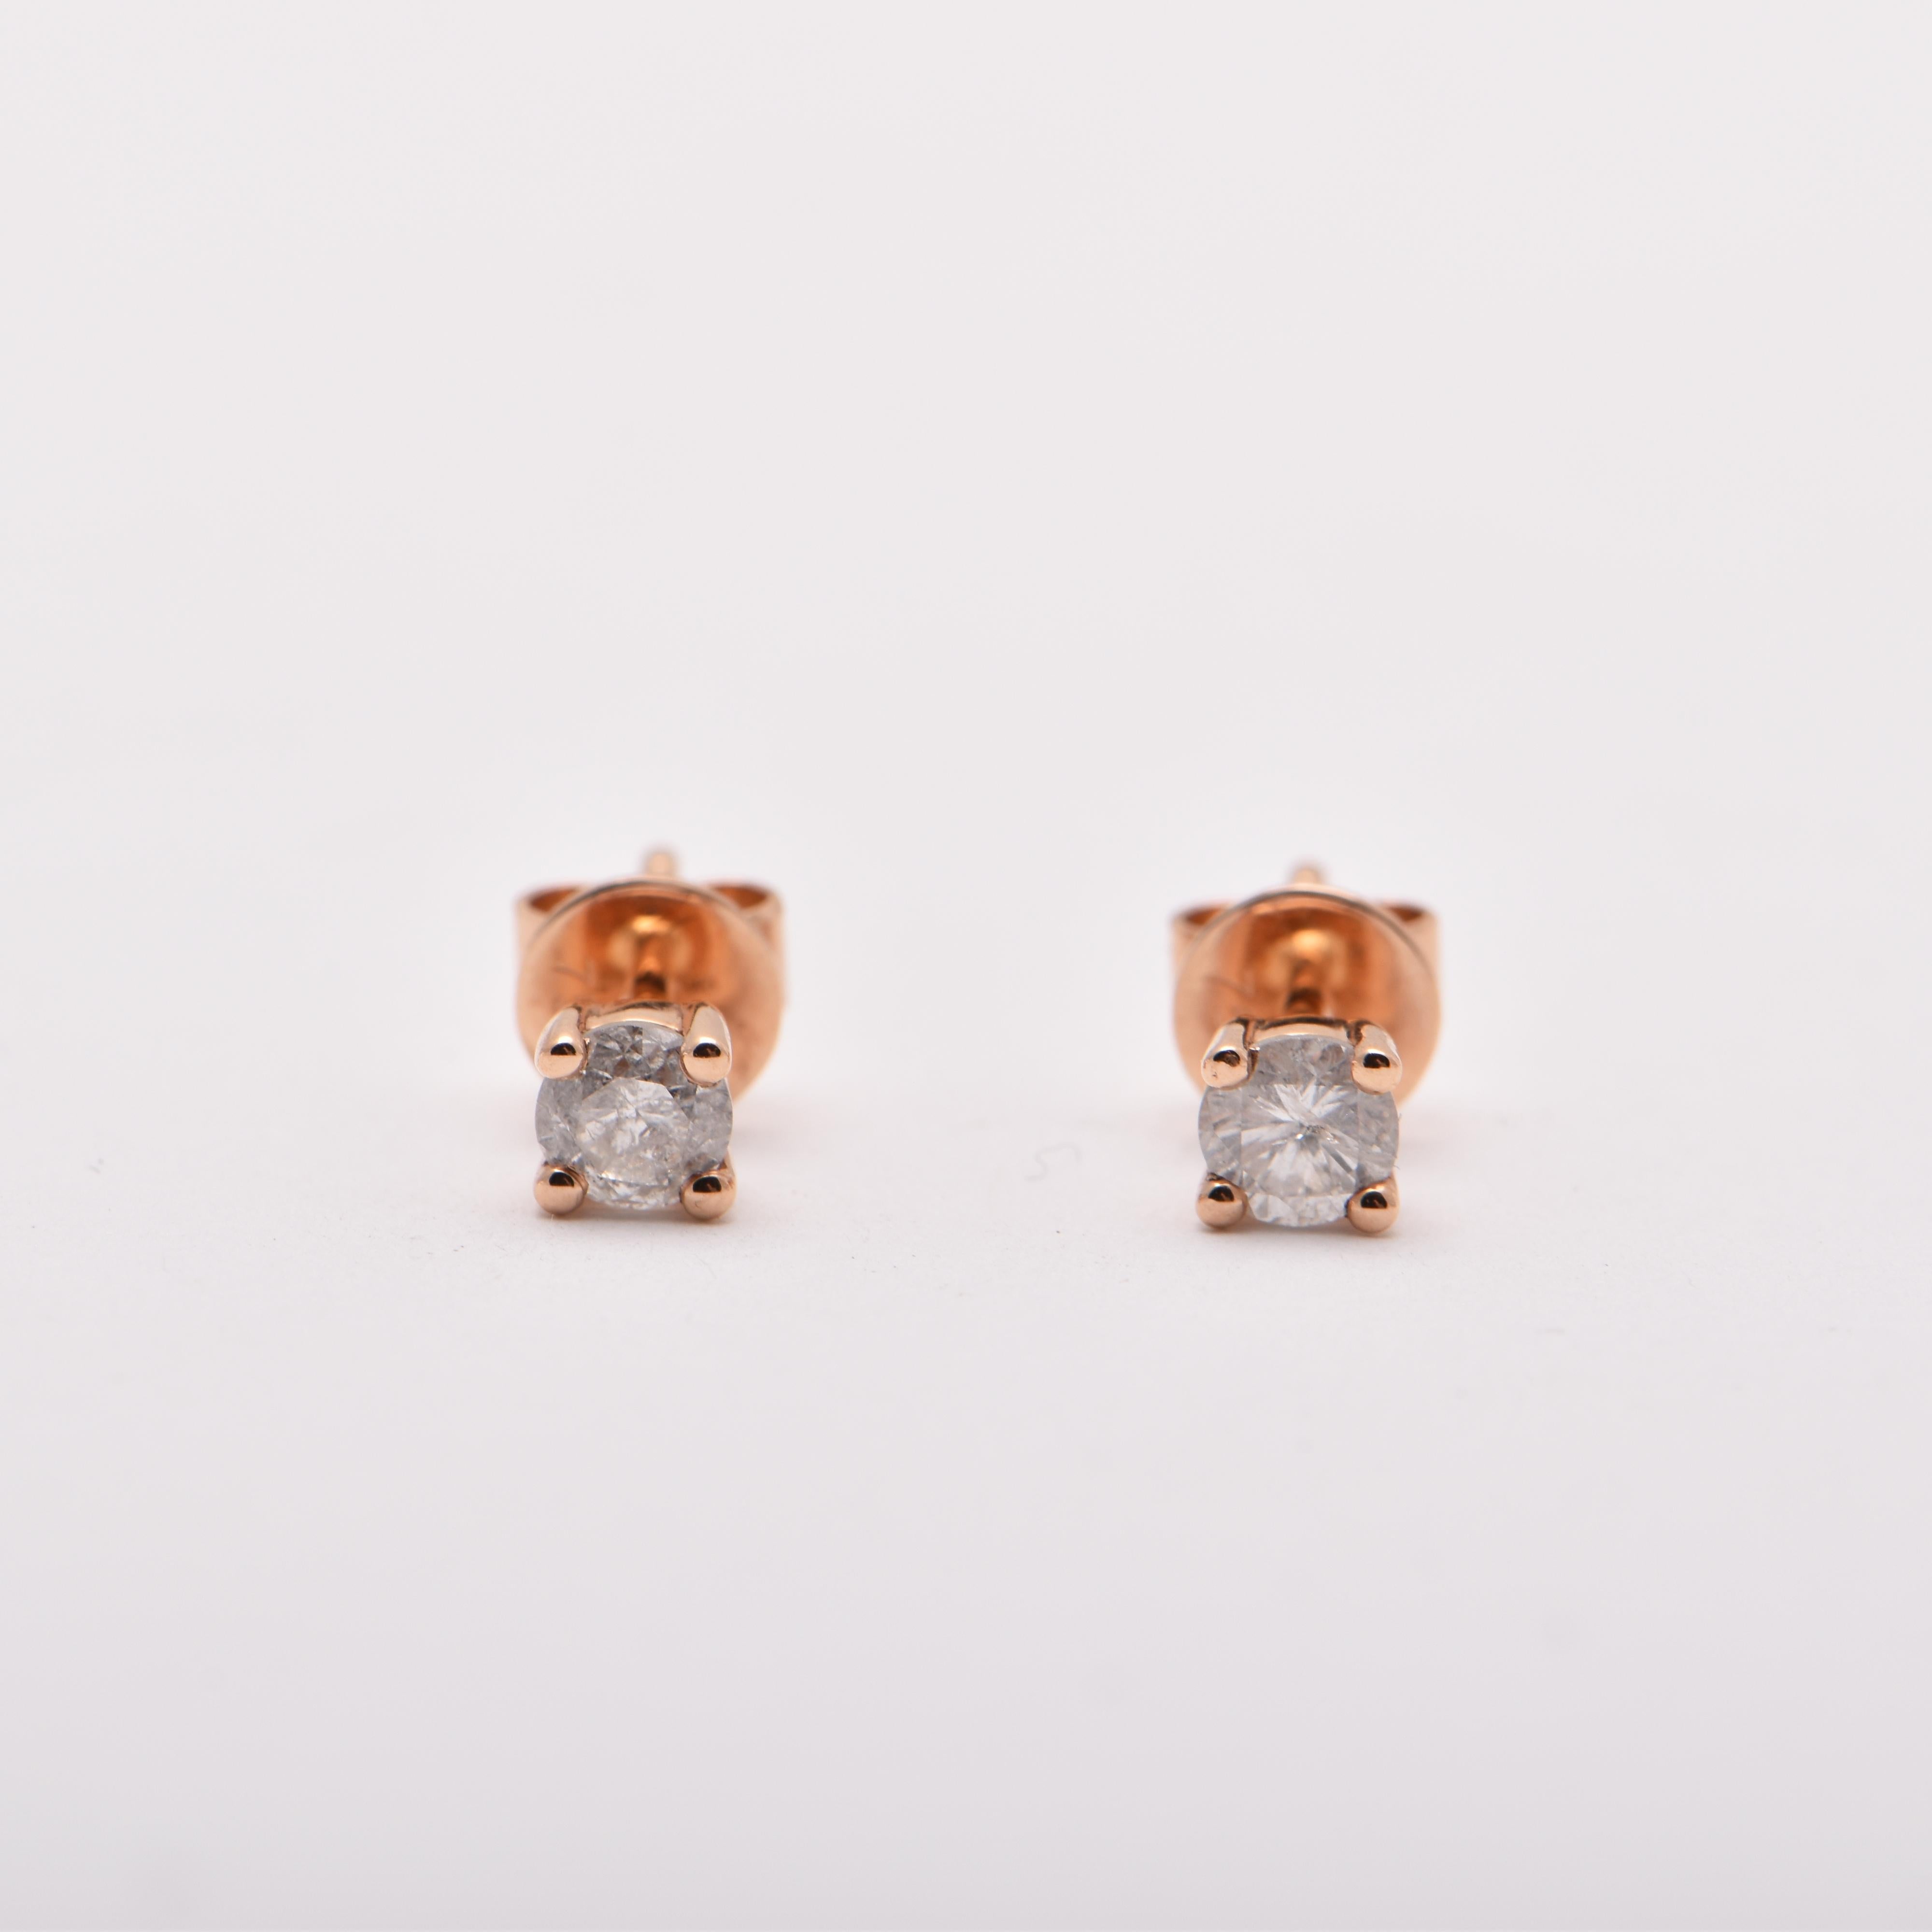 0.44 Carat Diamond Studs in 18 Carat Rose Gold In New Condition For Sale In Sydney, AU